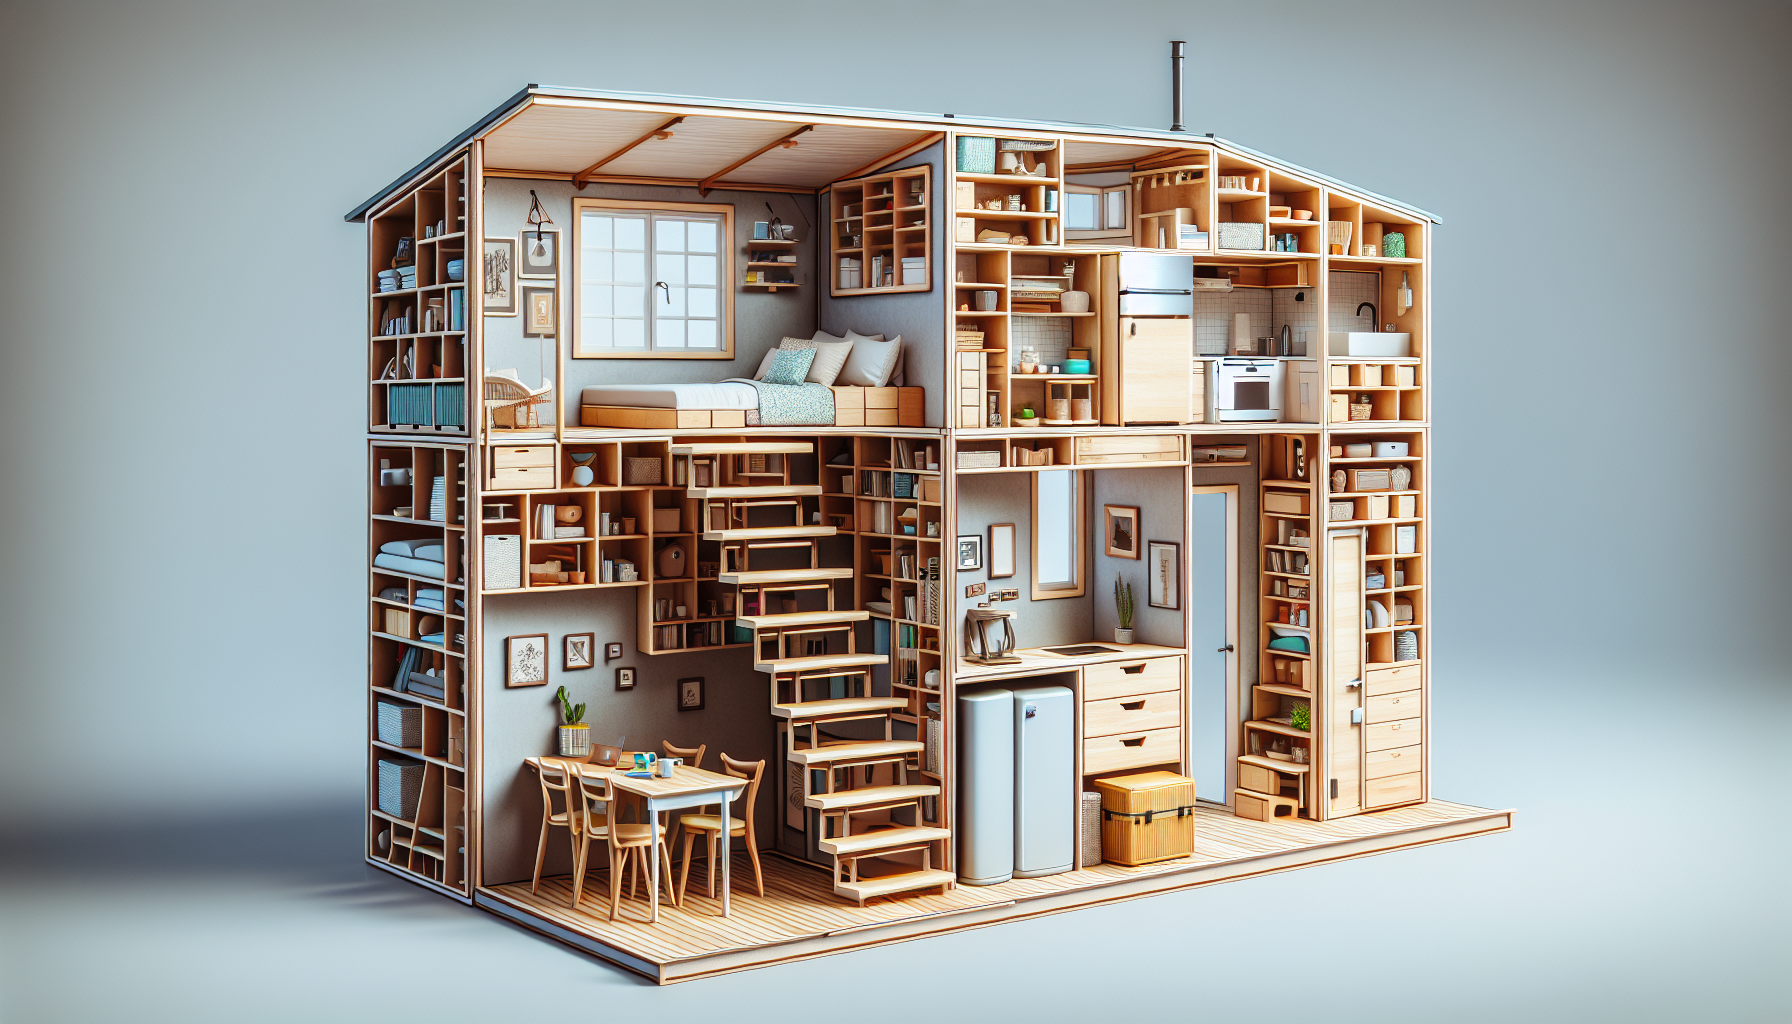 Illustration of innovative storage solutions in a tiny house